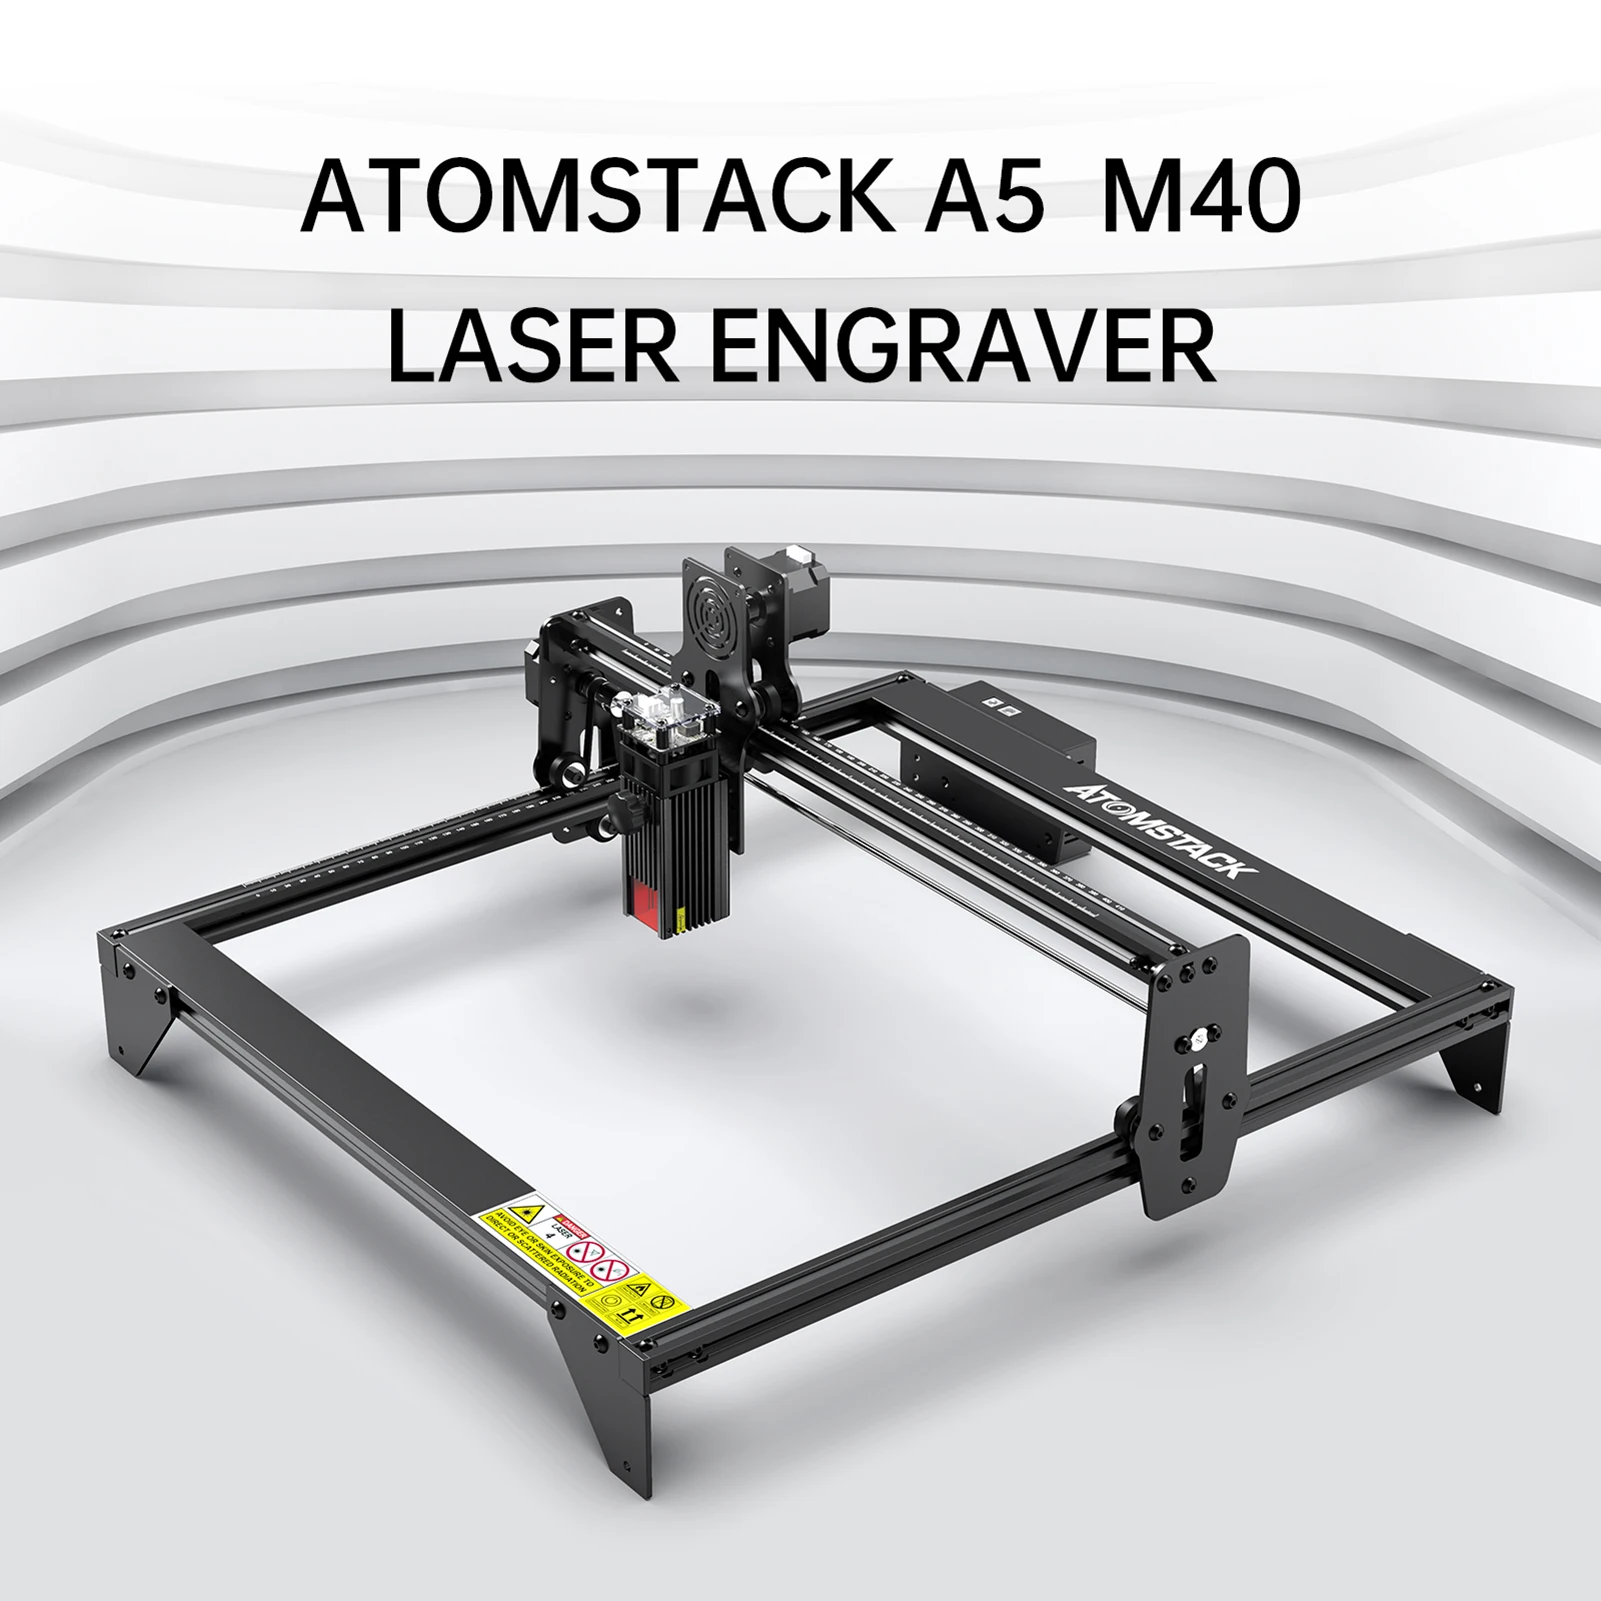 

ATOMSTACK A5 M40 Laser Engraver DIY cnc router Laser Engraving Cuting Machine 410*400mm Carving Area CNC machine tool